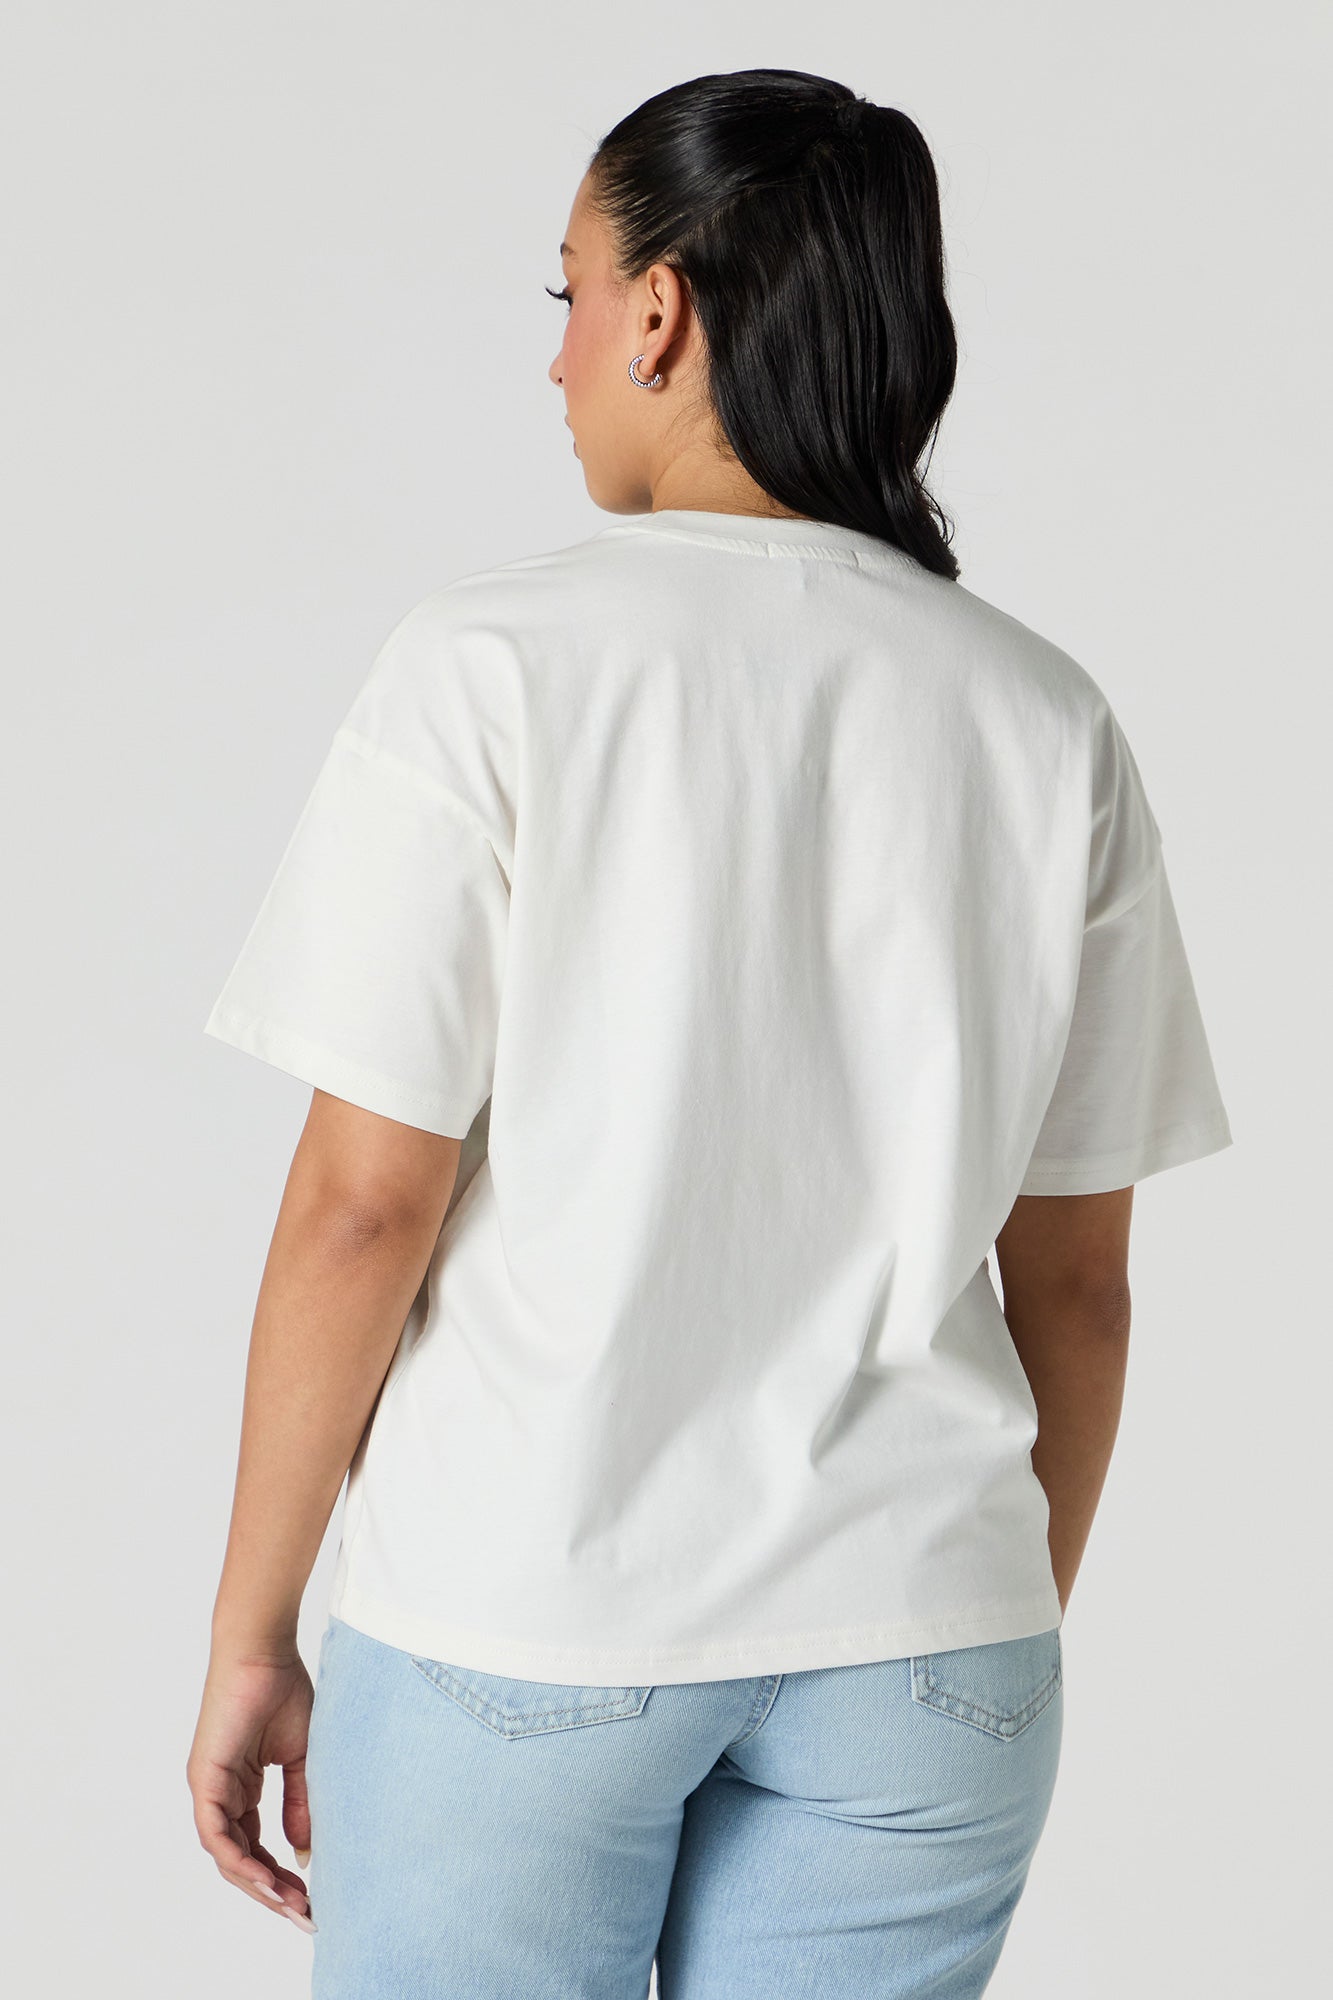 Weekend Mood Embroidered T-Shirt